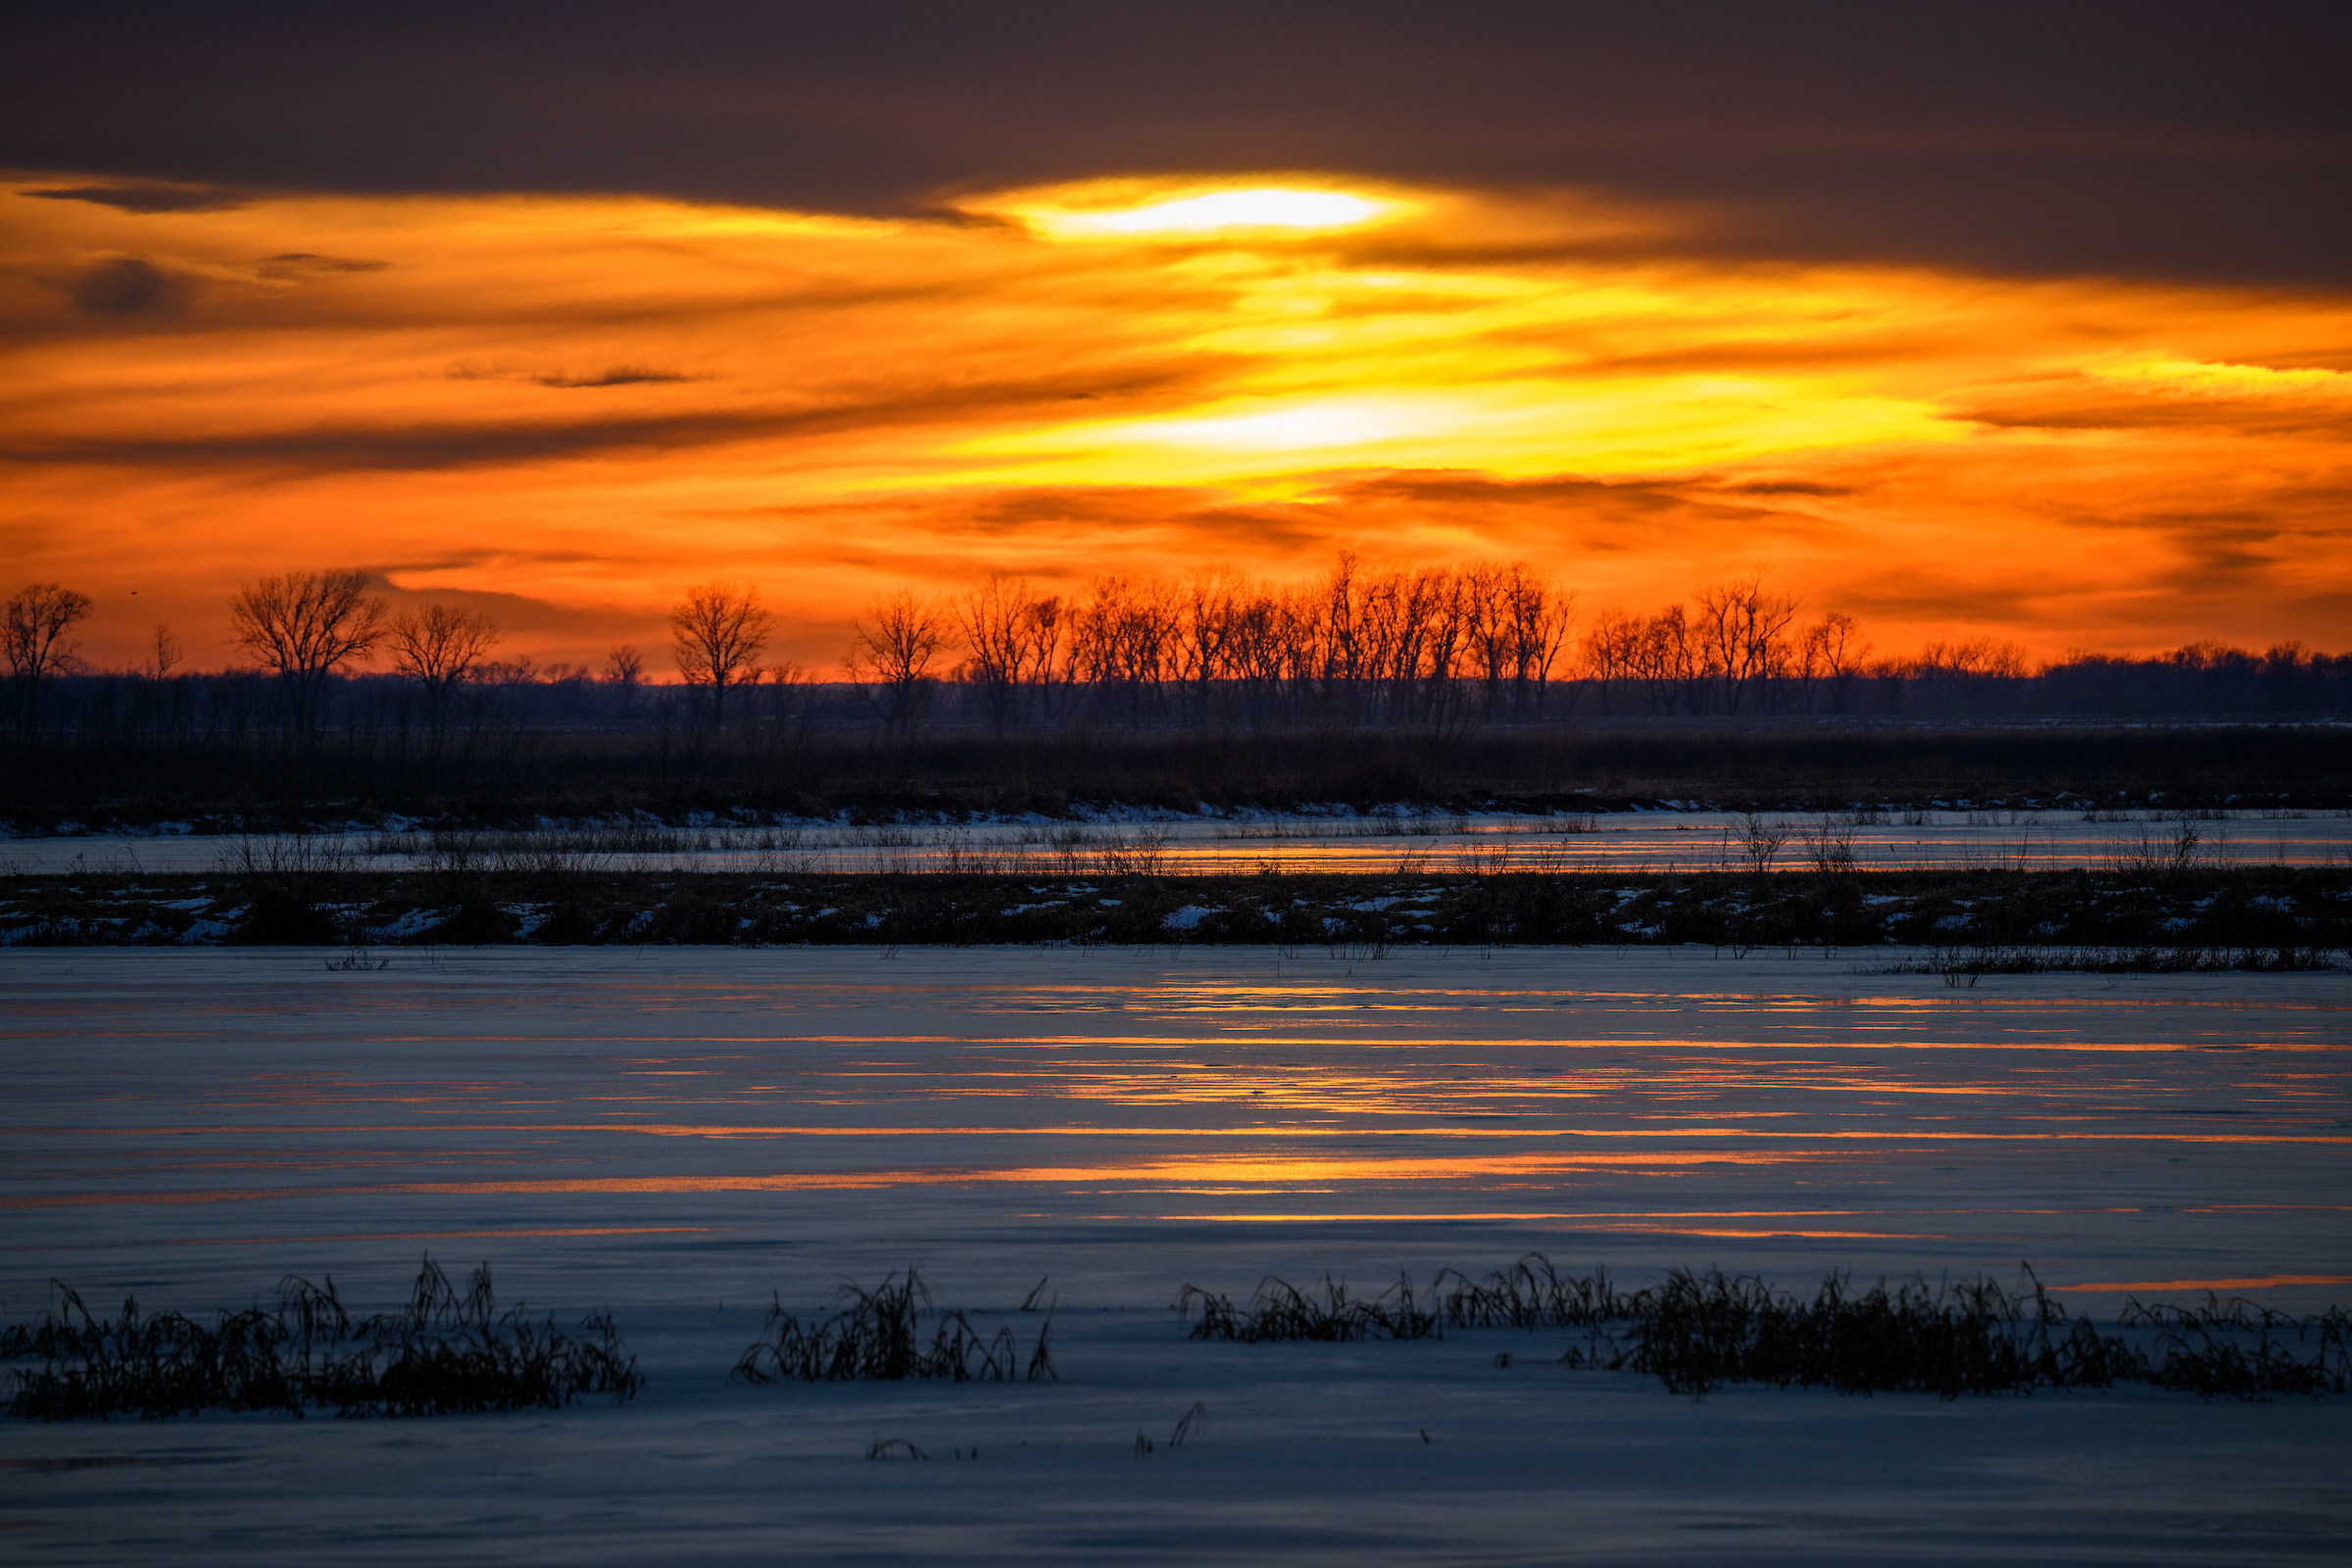 Sunset over the Cattail Pool at Loess Bluffs NWR (formerly known as Squaw Creek). Loess Bluffs is a wildlife refuge managed by the U.S. Fish and Wildlife Service. The 700-acre refuge, located in northwest Missouri is known for the migrating waterfowl, particularly Snow Geese. Fall and Spring migration can bring millions of Snow Geese to the refuge. Also, bald eagles and an occasional golden eagle pass through the area during the fall and winter months. 

The 10-mile auto tour around the waterways and marshes of the refuge is an excellent way to spot birds of prey, waterfowl, beavers, otters, and muskrats.